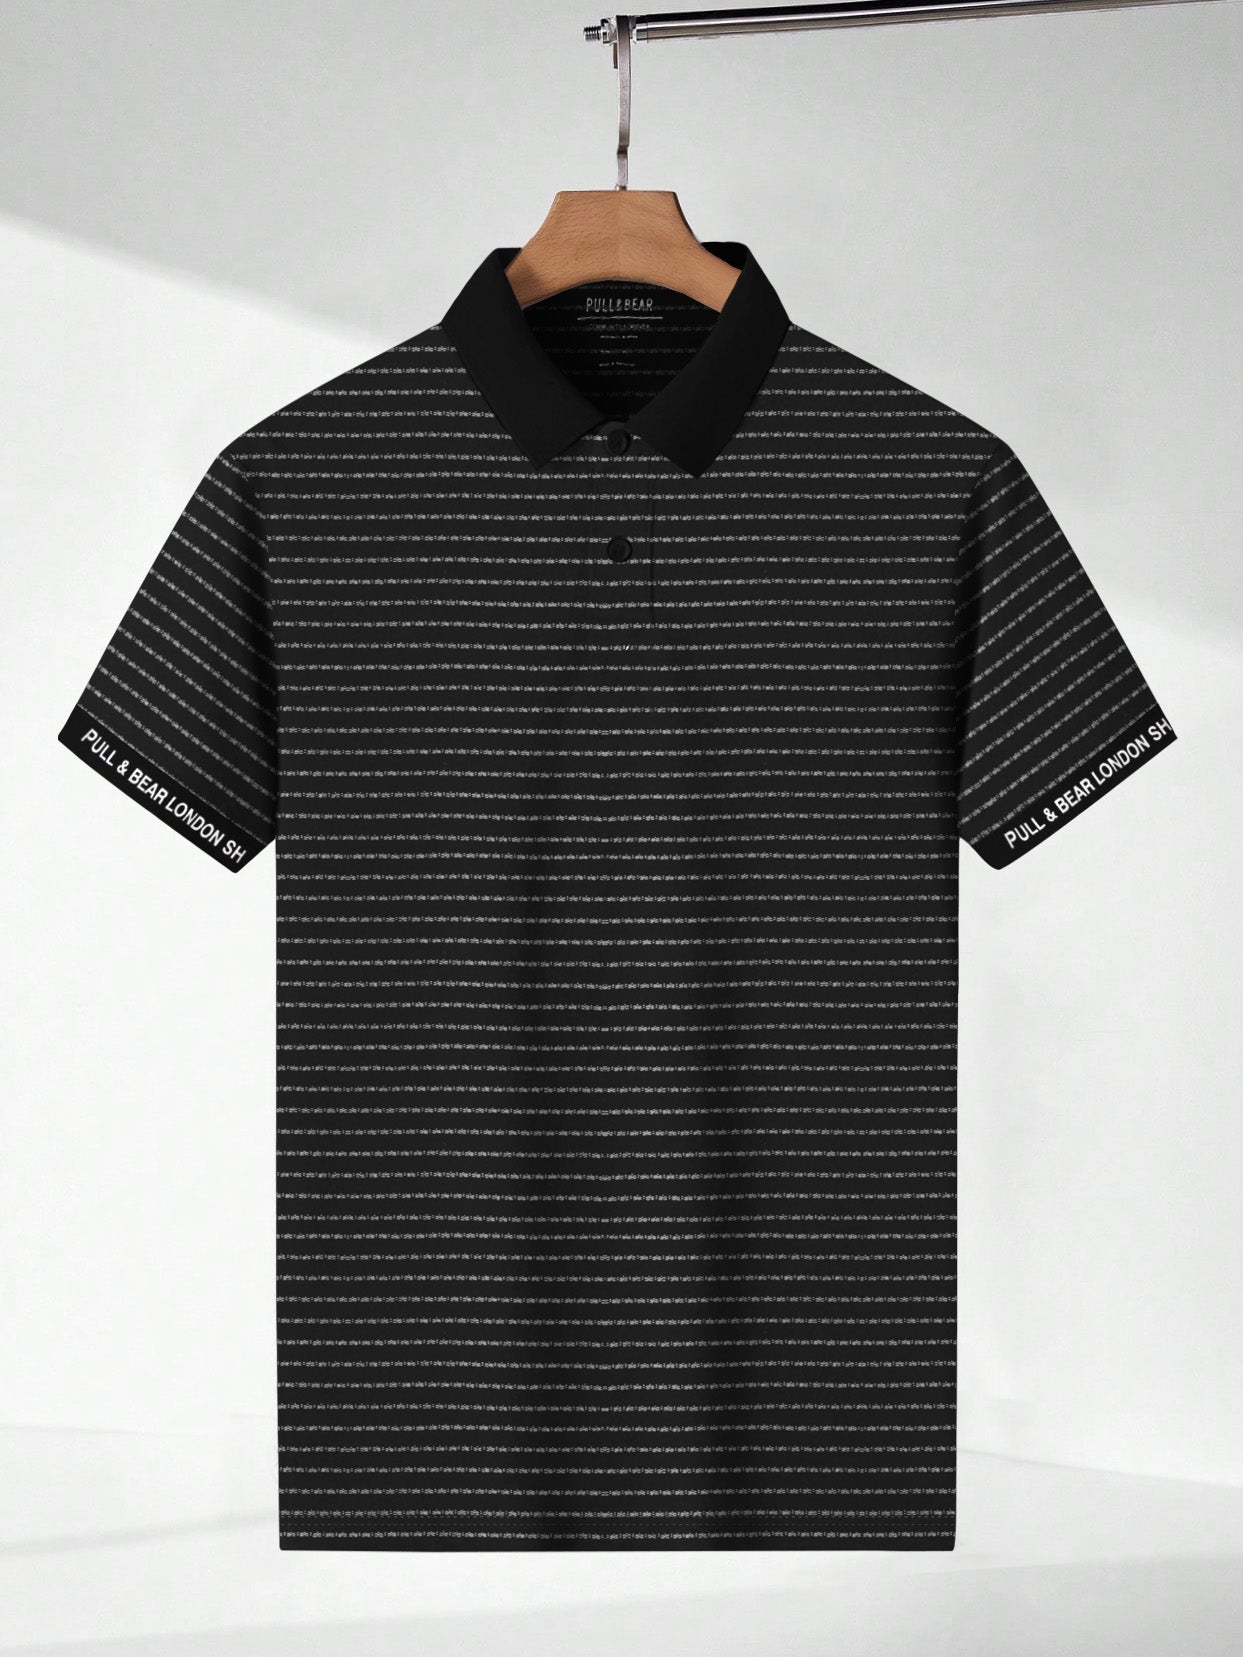 P&B Summer Polo Shirt For Men-Black with White Stripe-BE734/BR12993